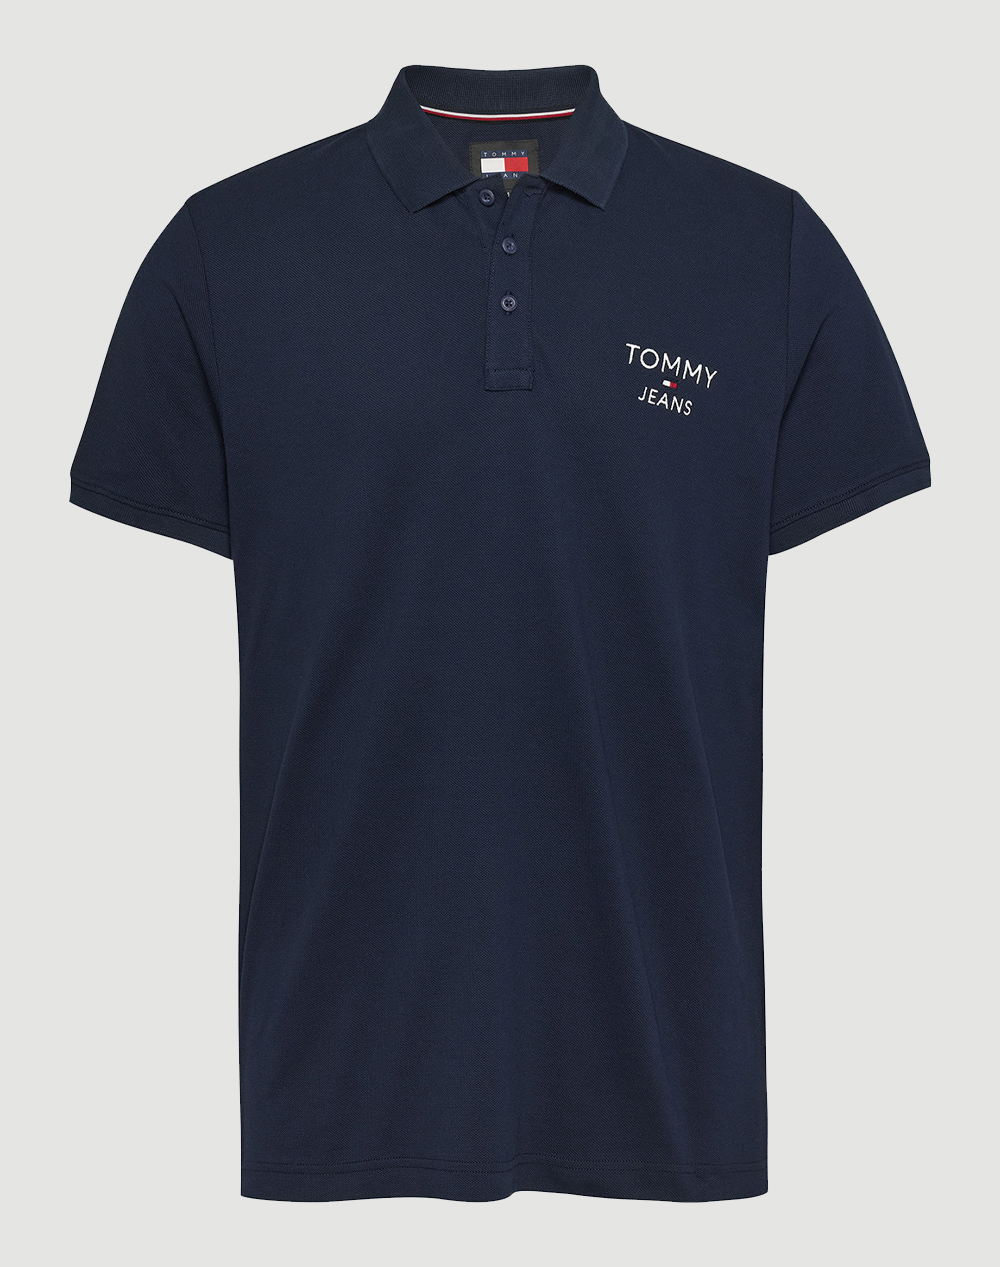 TOMMY JEANS TJM SLIM CORP POLO